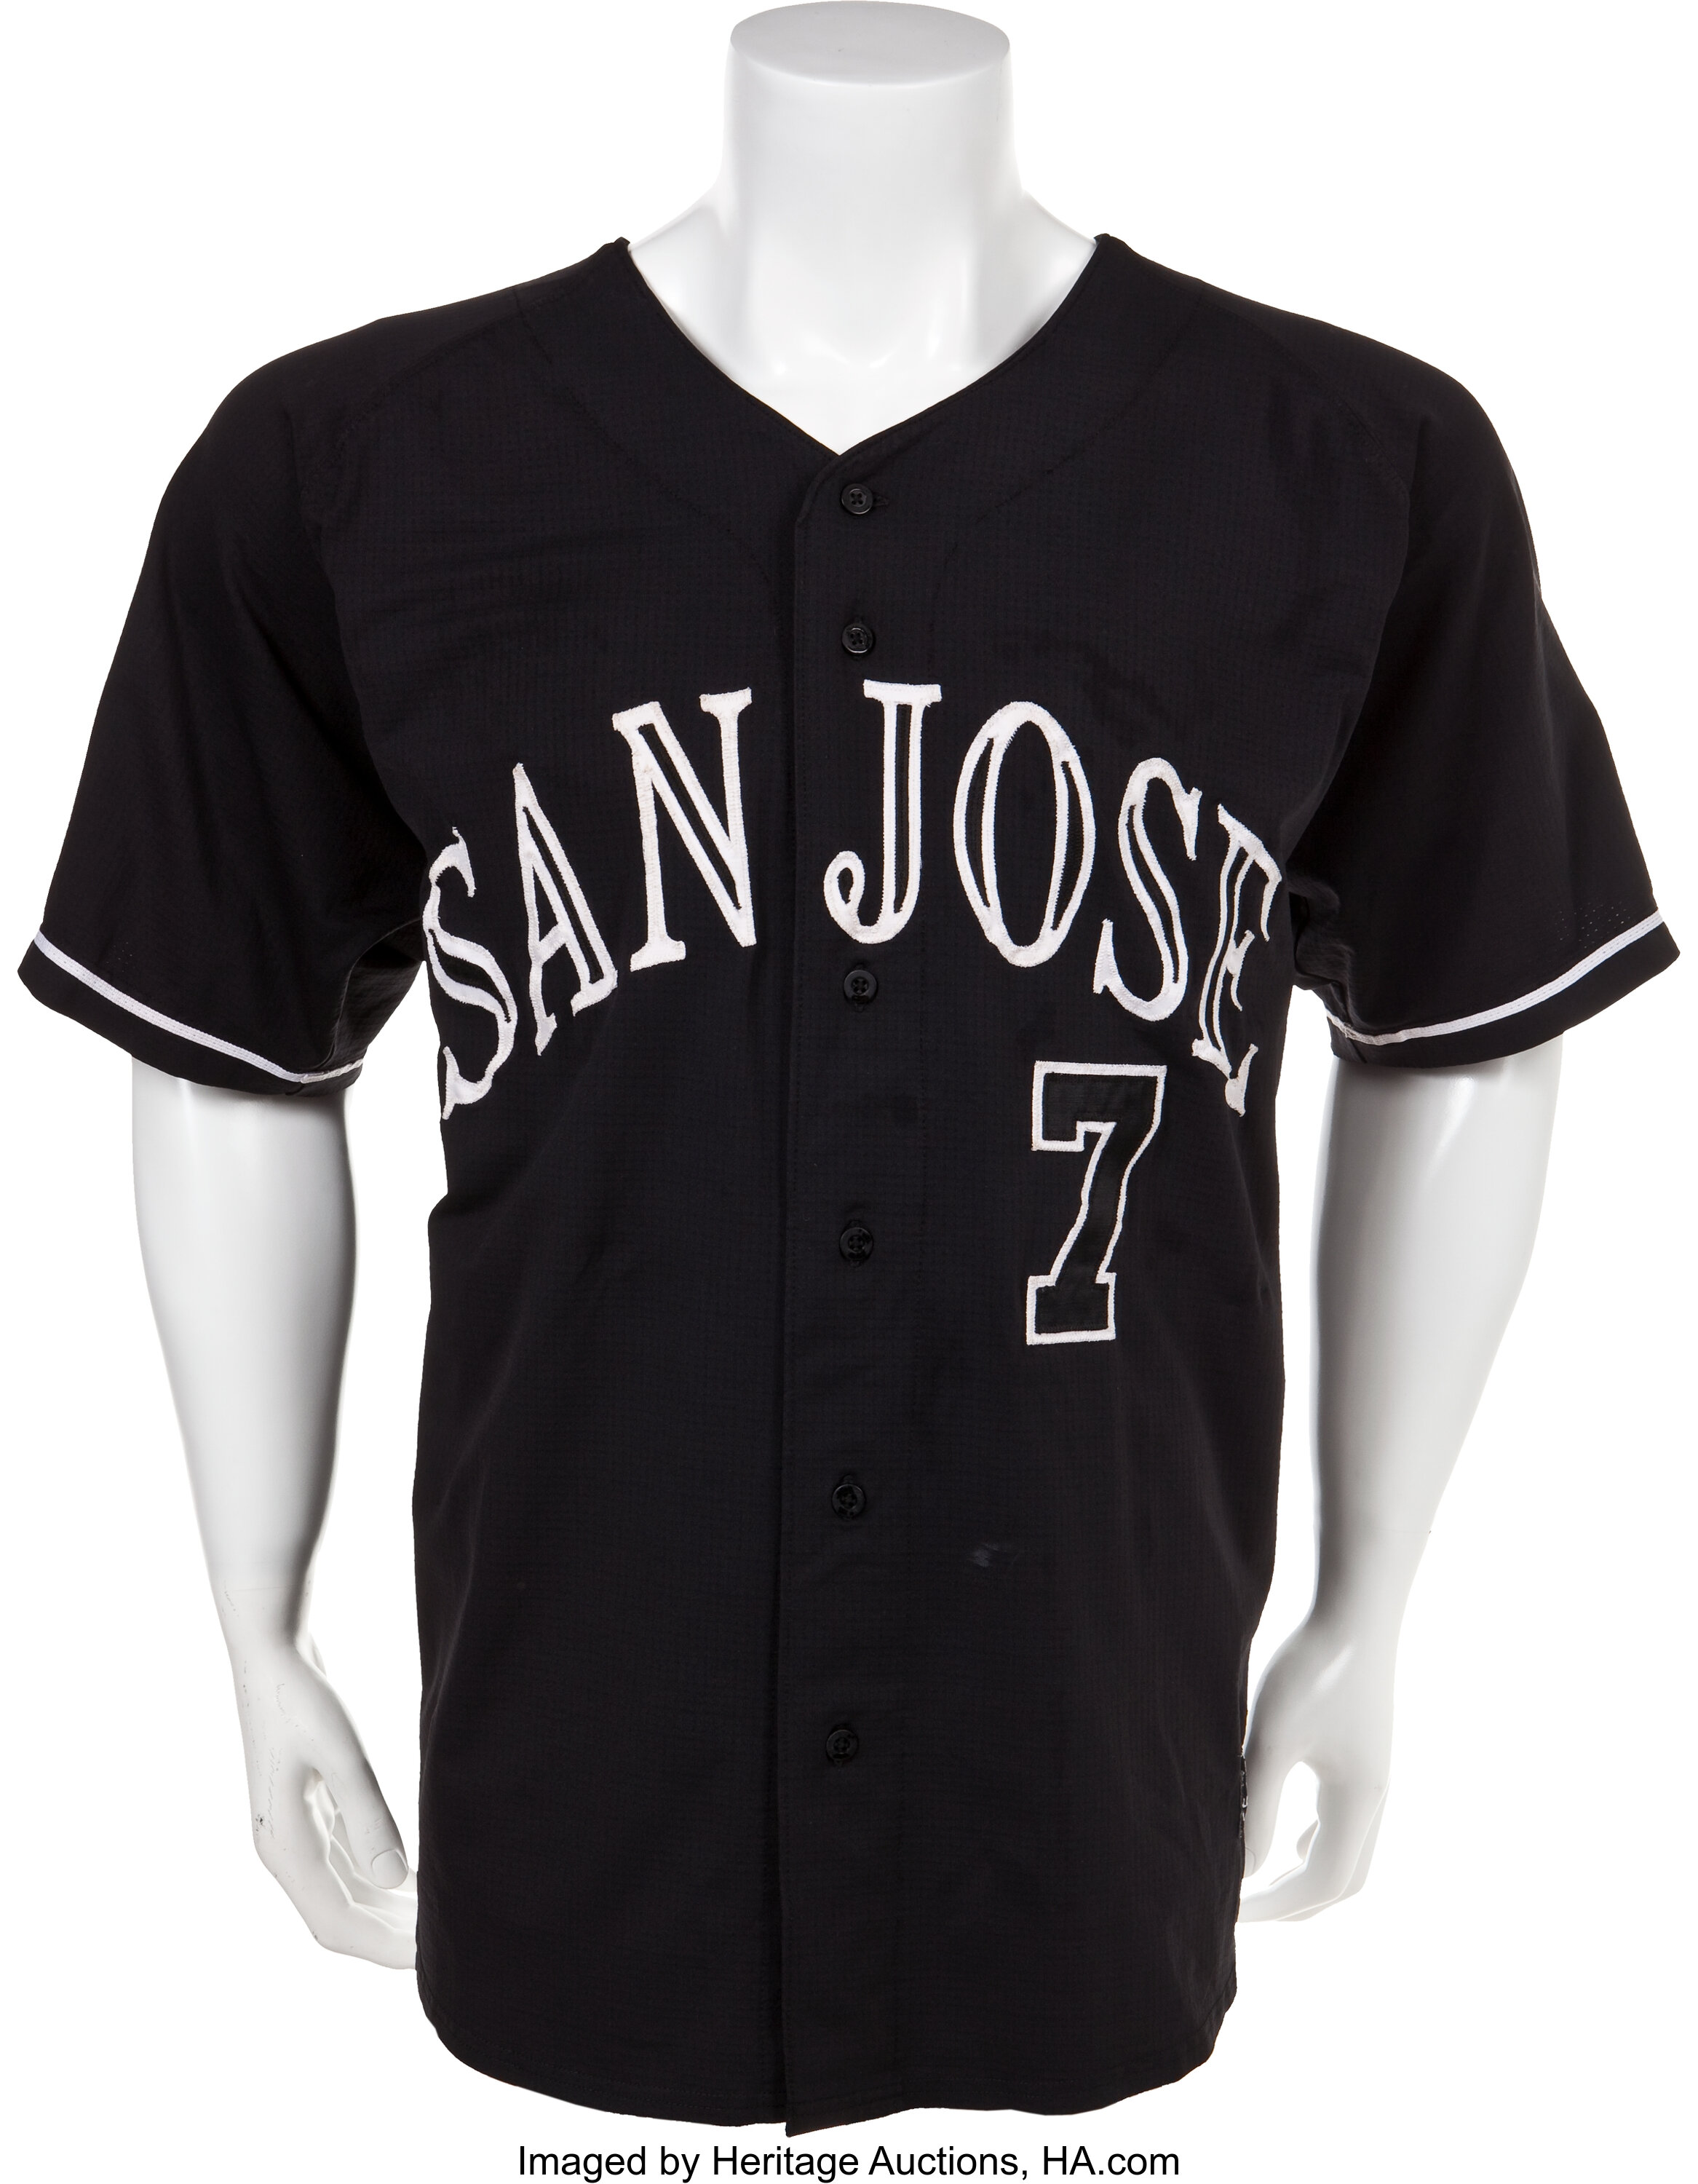 buster posey jersey for sale